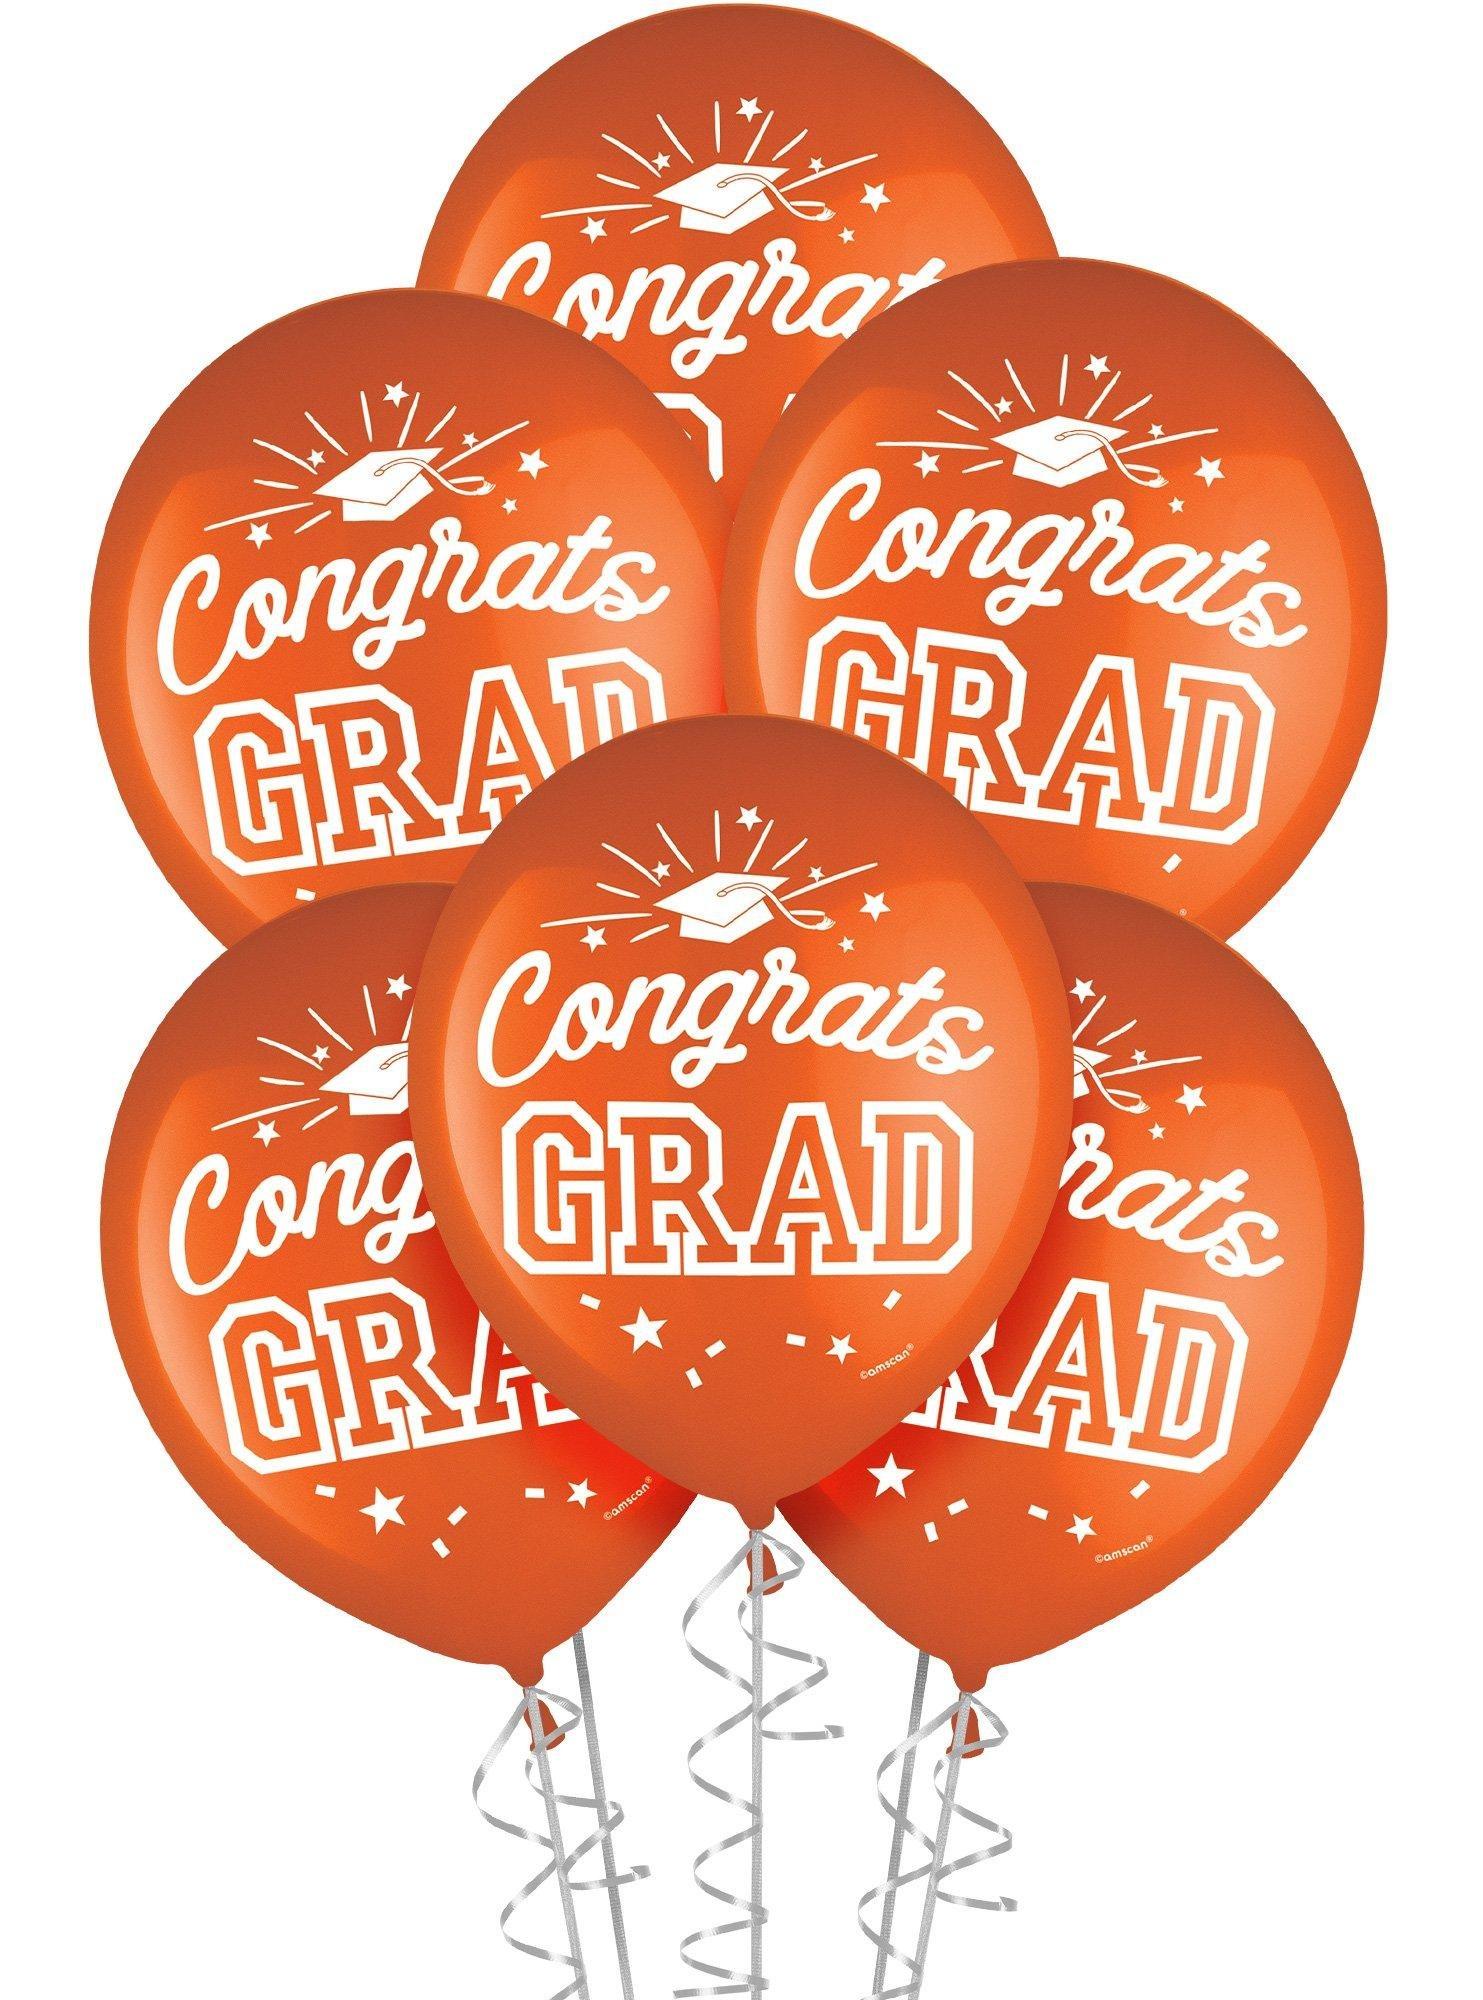 Graduation Party Supplies Kit for 80 with Decorations, Banners, Balloons, Plates, Napkins - Orange Congrats Grad